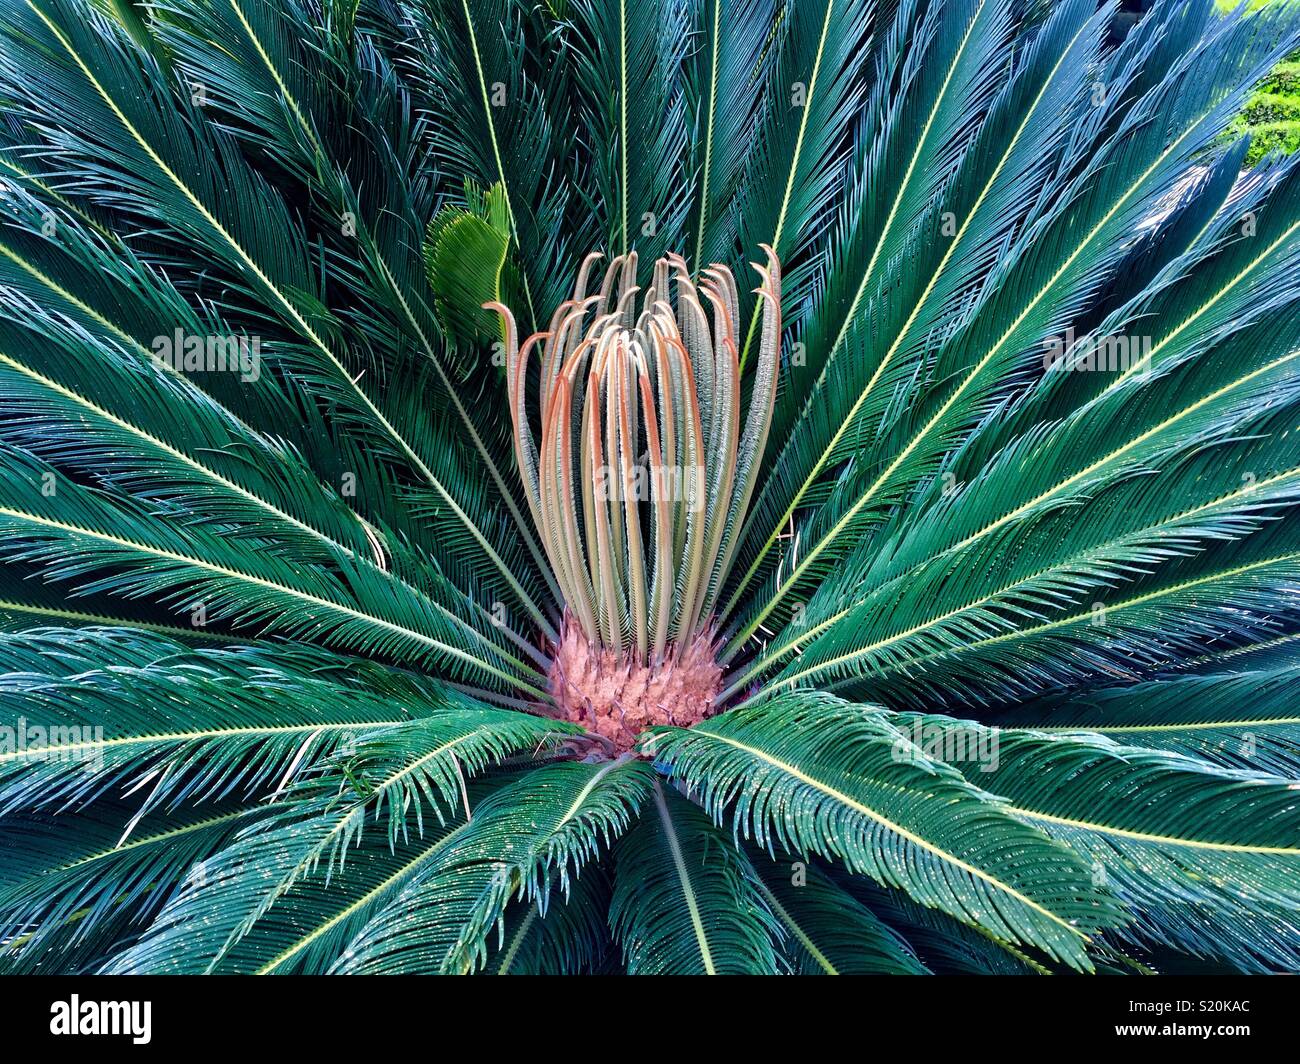 Closeup of the Sago Palm tree with new growth in its center. Stock Photo